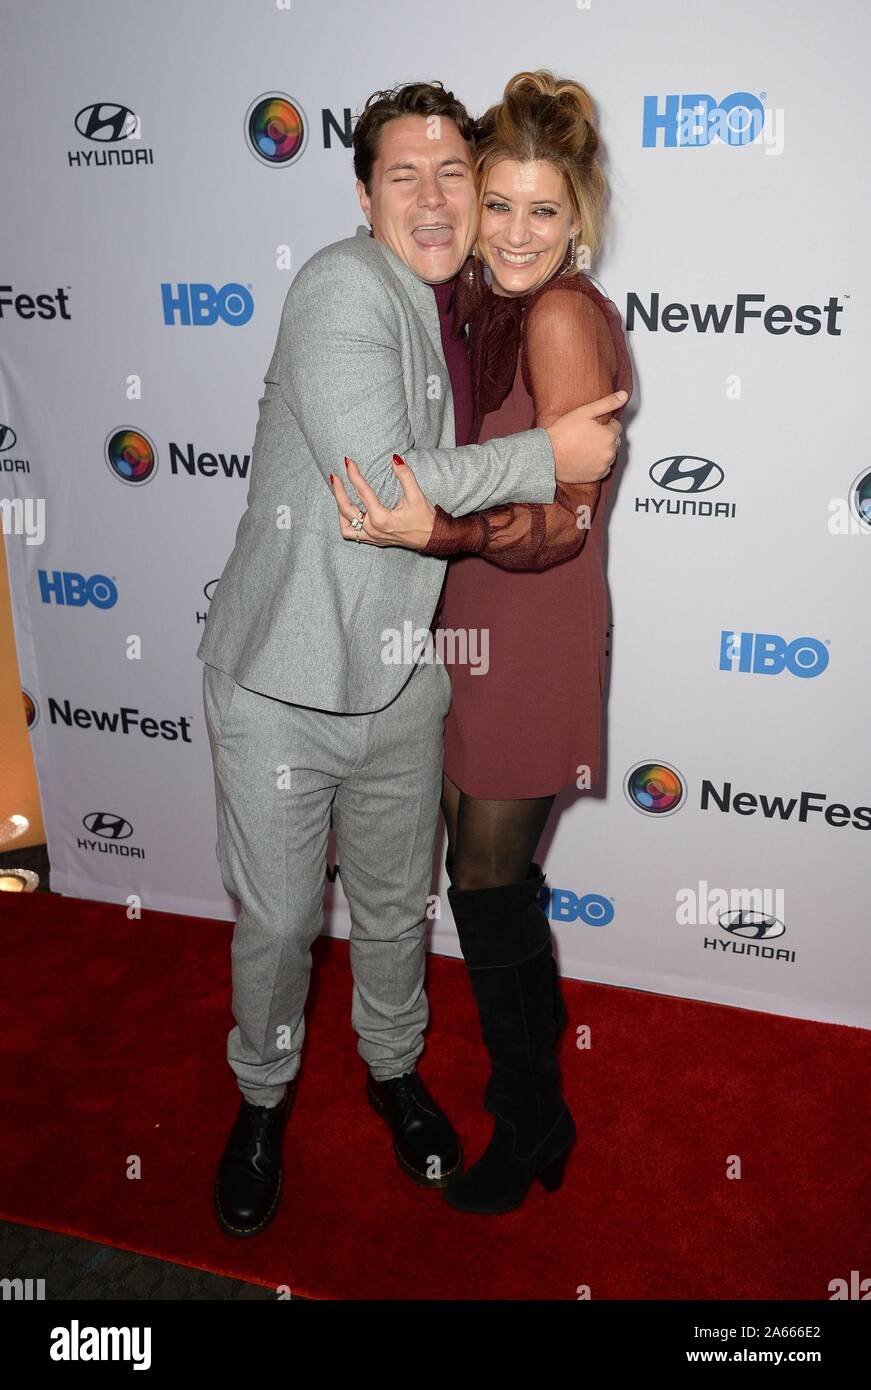 New York, NY, USA. 23rd Oct, 2019. Augustus Prew, Kate Walsh at arrivals for SELL BY Screening at NewFest 2019 Opening Night, SVA Theater, New York, NY October 23, 2019. Credit: Kristin Callahan/Everett Collection/Alamy Live News Stock Photo